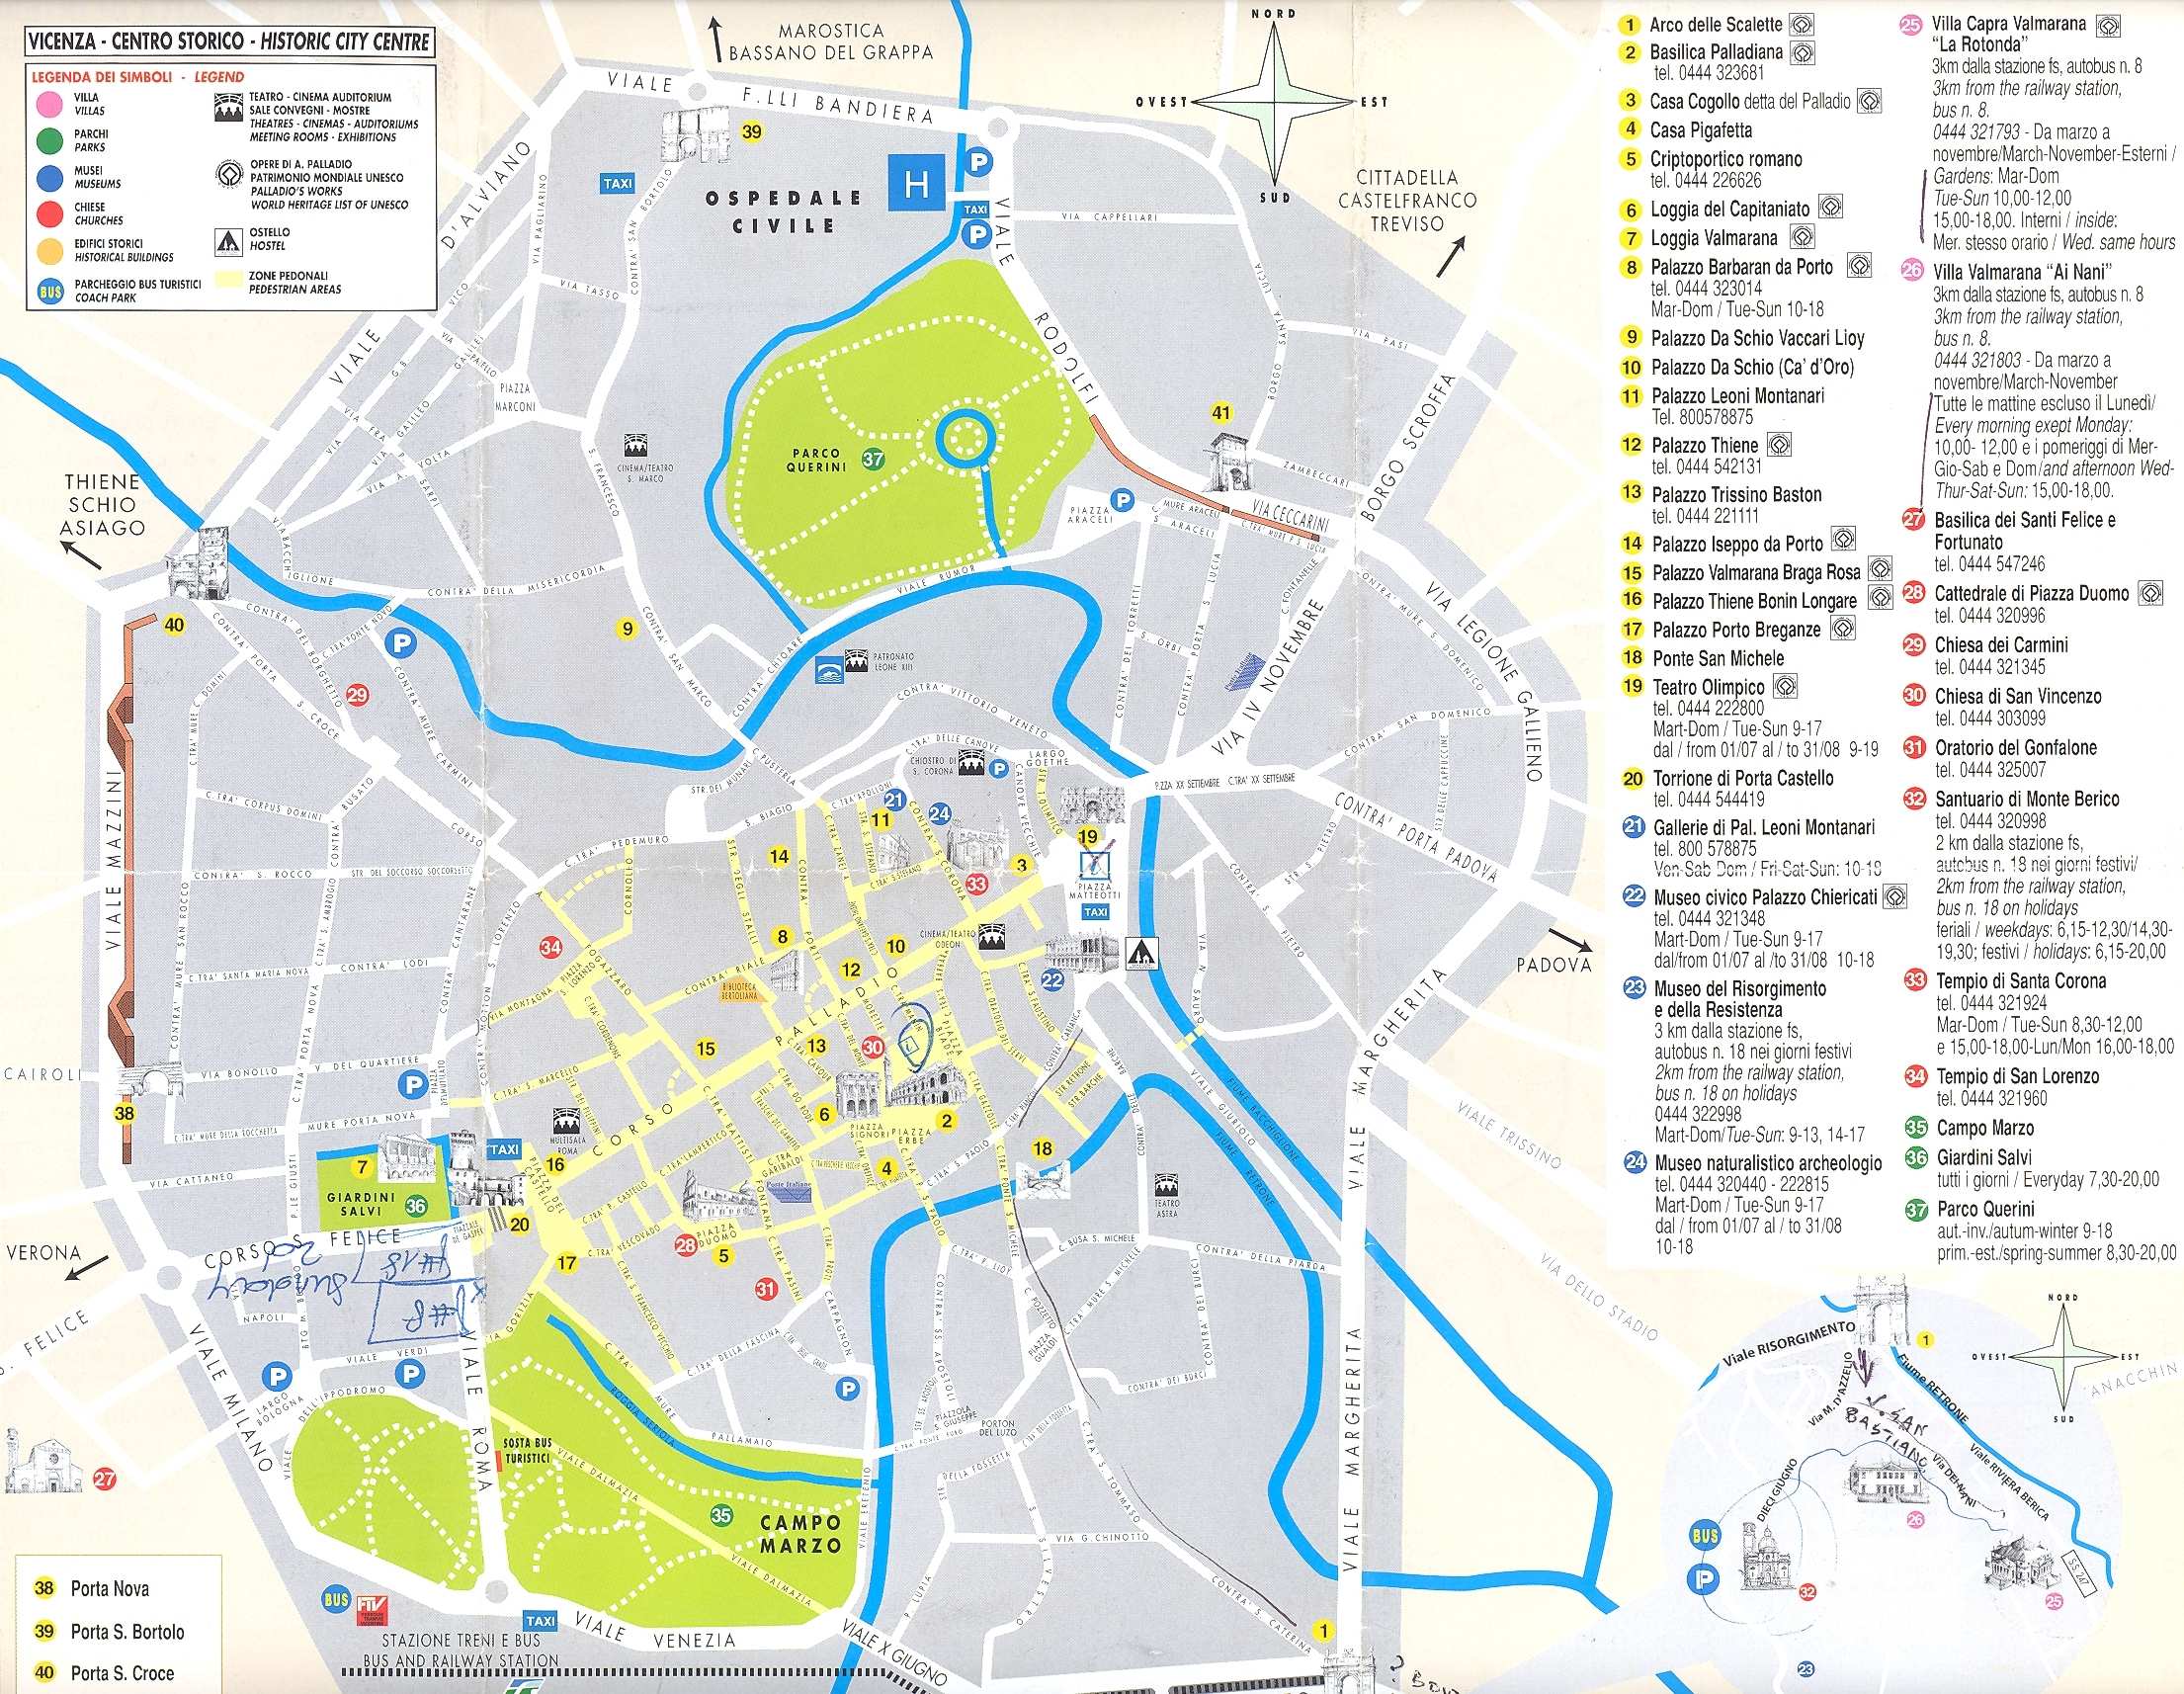 vicenza karta Large Vicenza Maps for Free Download and Print | High Resolution  vicenza karta